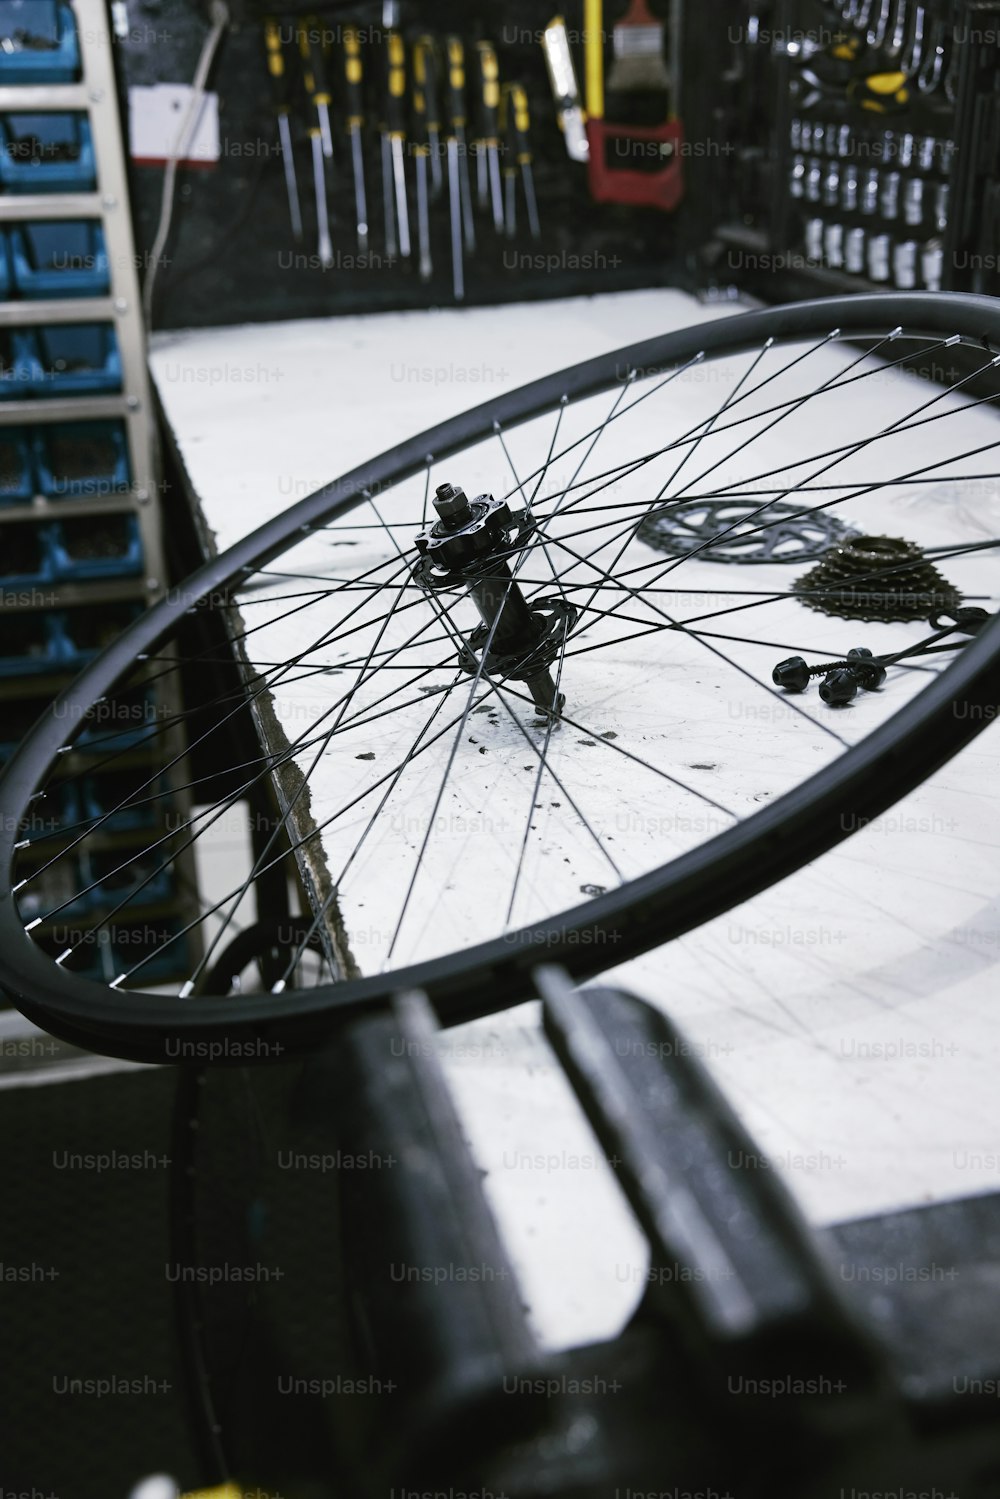 a bicycle wheel is shown in the reflection of a mirror